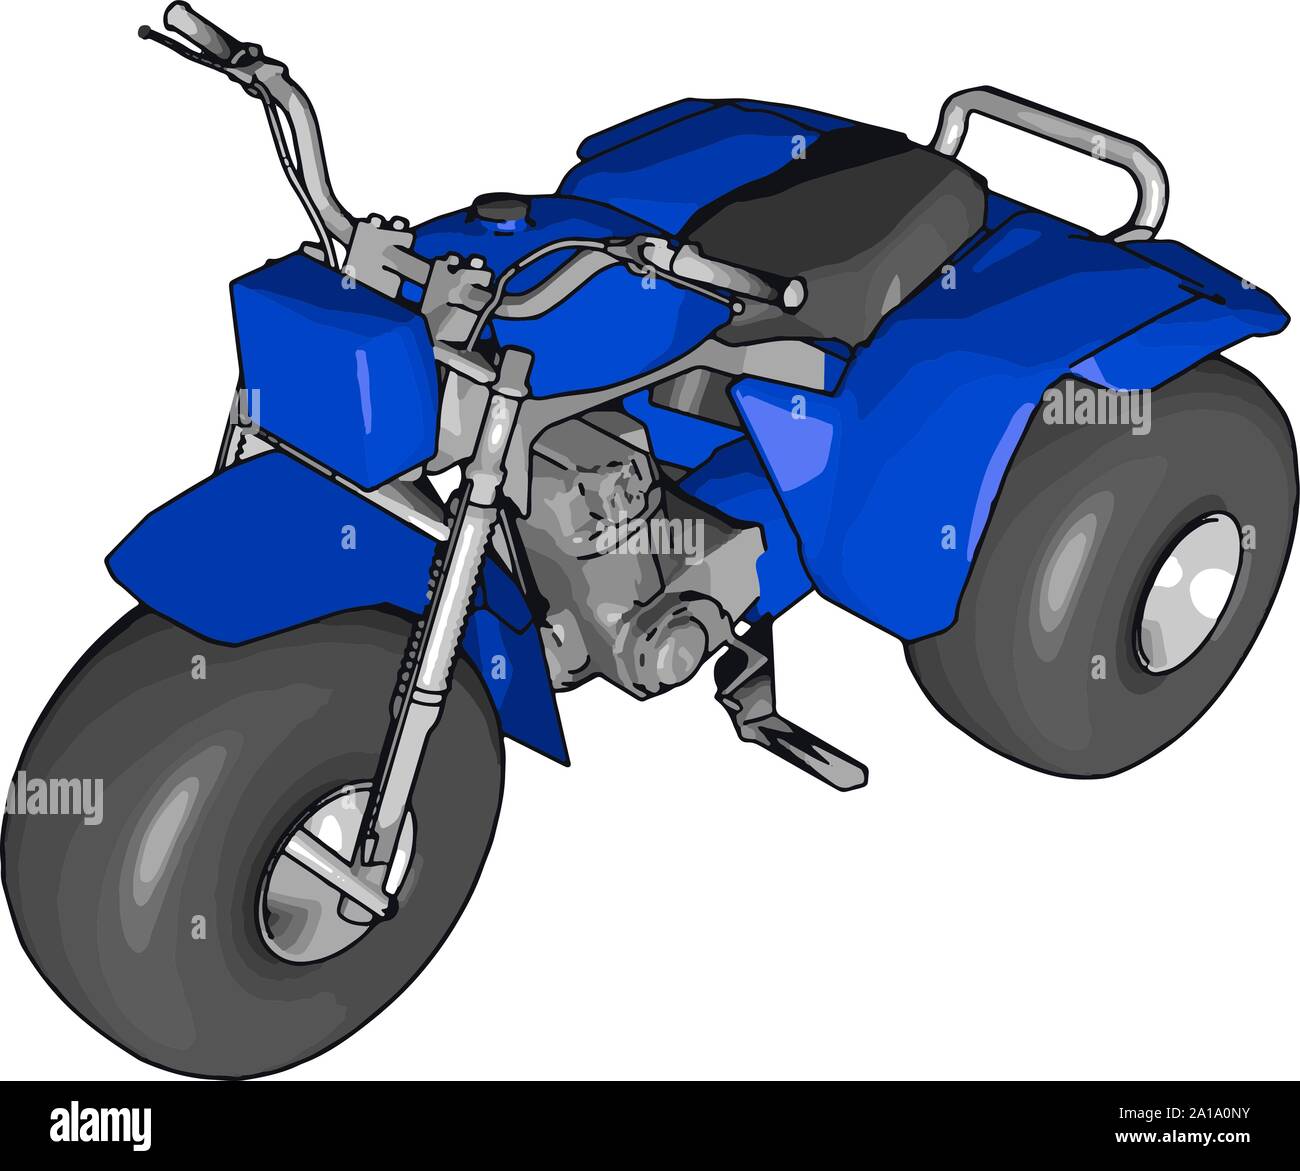 Blue motorcycle, illustration, vector on white background. Stock Vector